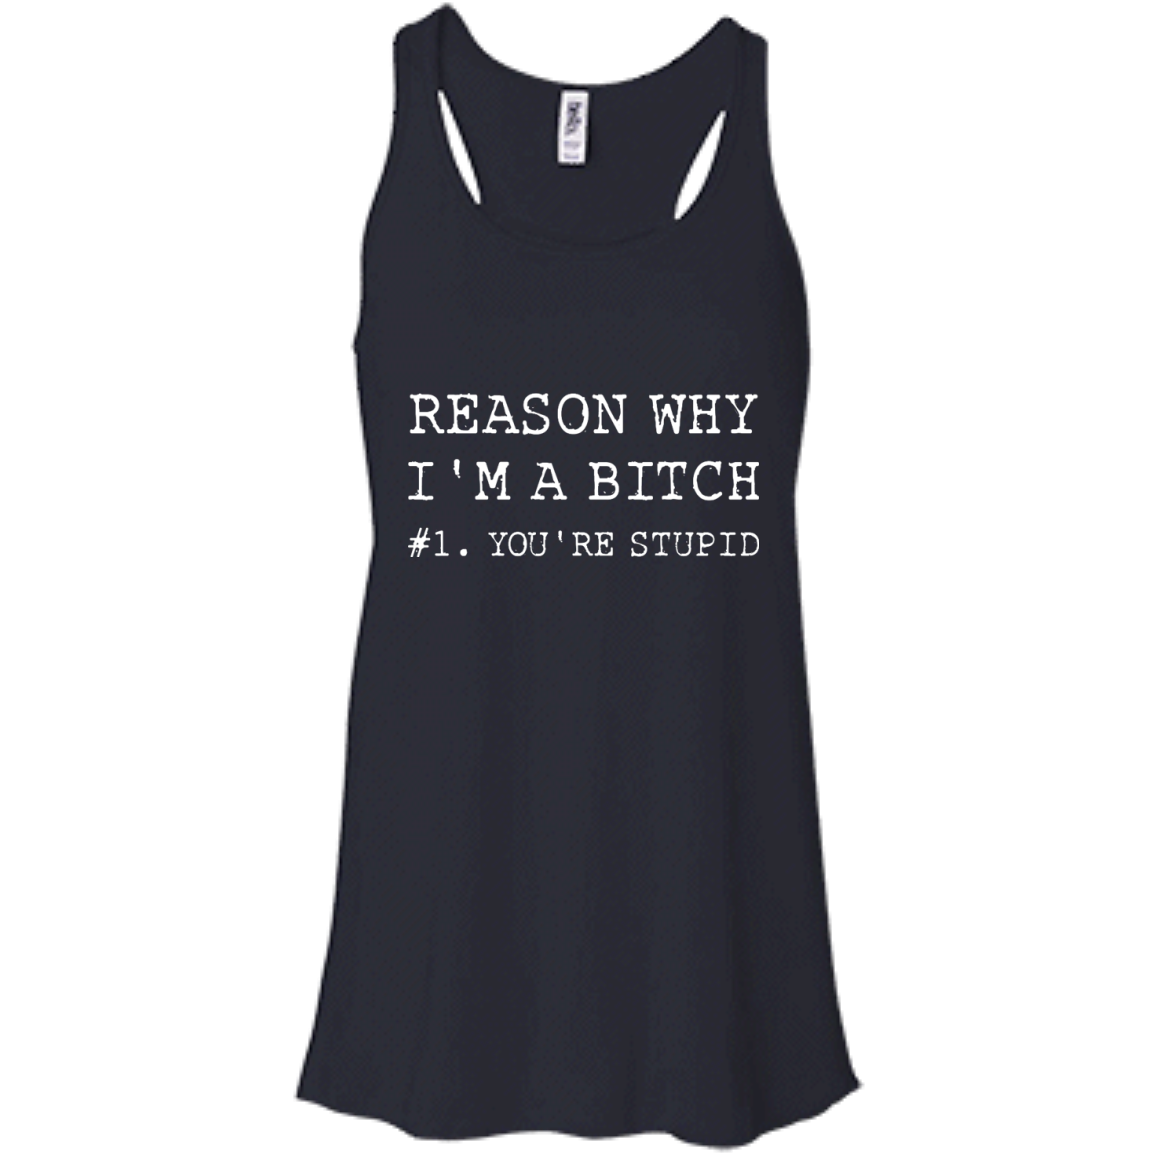 Reasons why I'm a bitch You're stupid shirt, tank top, long sleeve